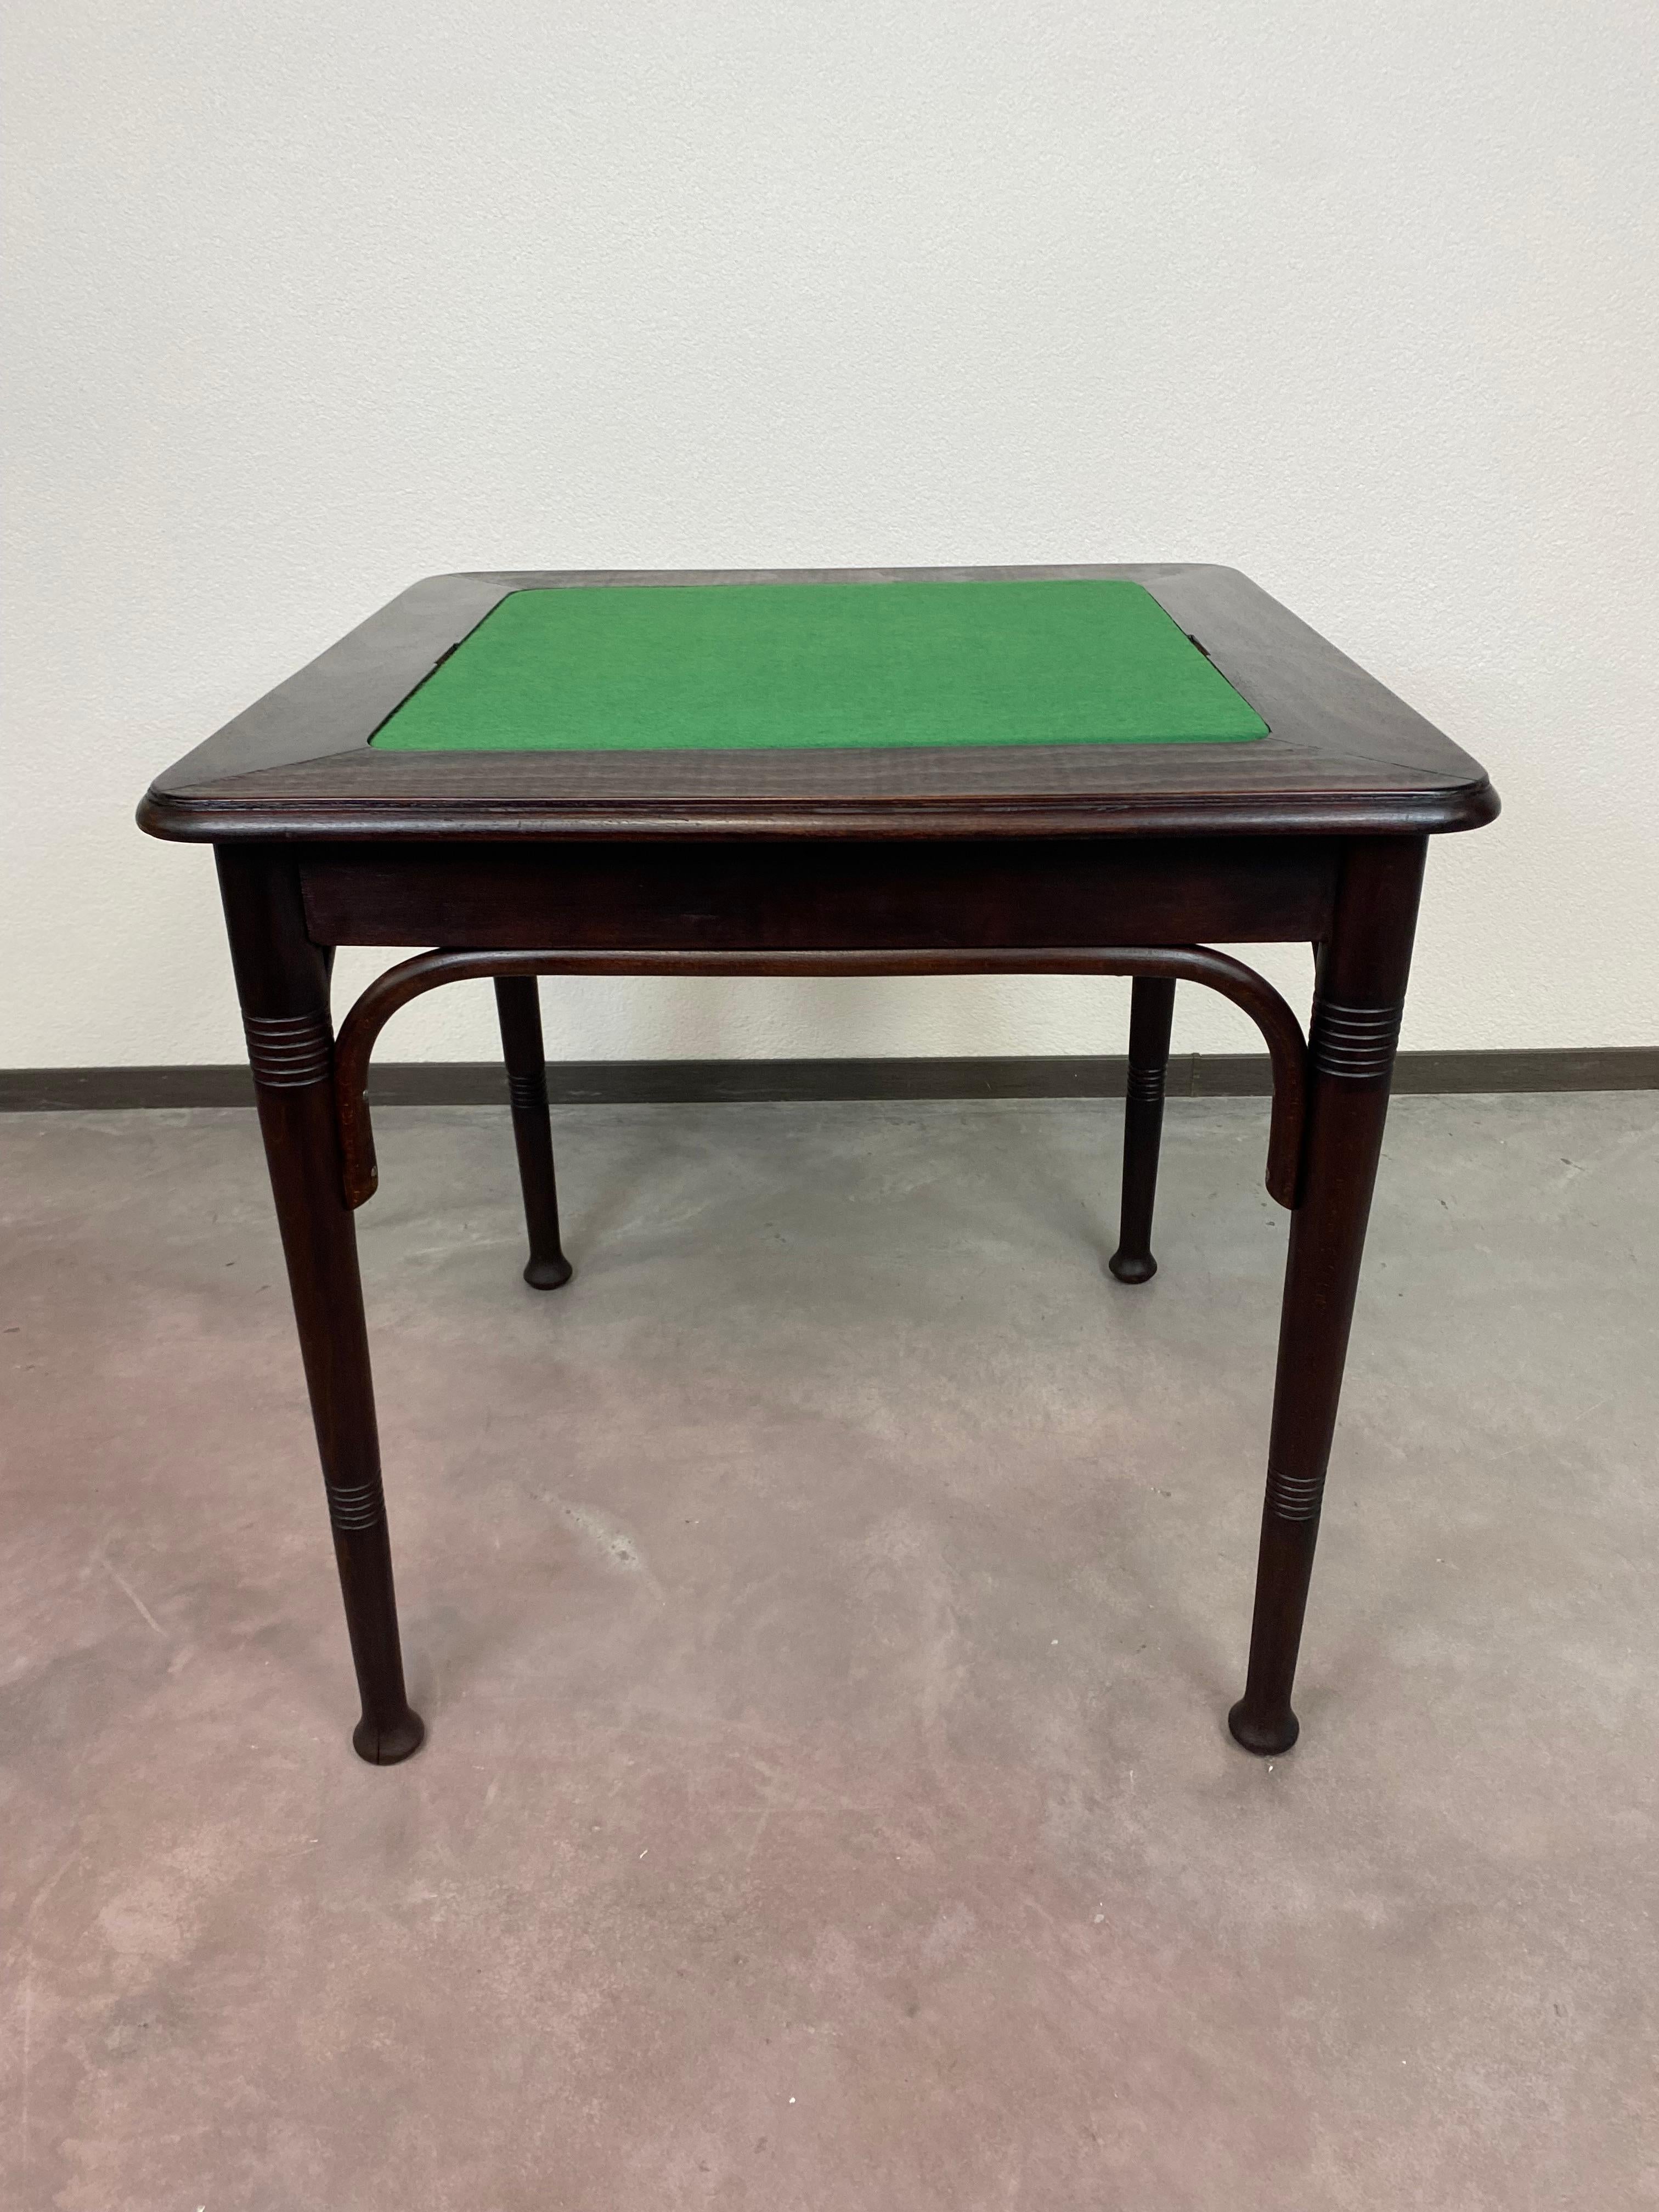 Secession playing table Thonet no.10. Original chess and card table documented in catalog from 1906. Professionally stained and repolished.